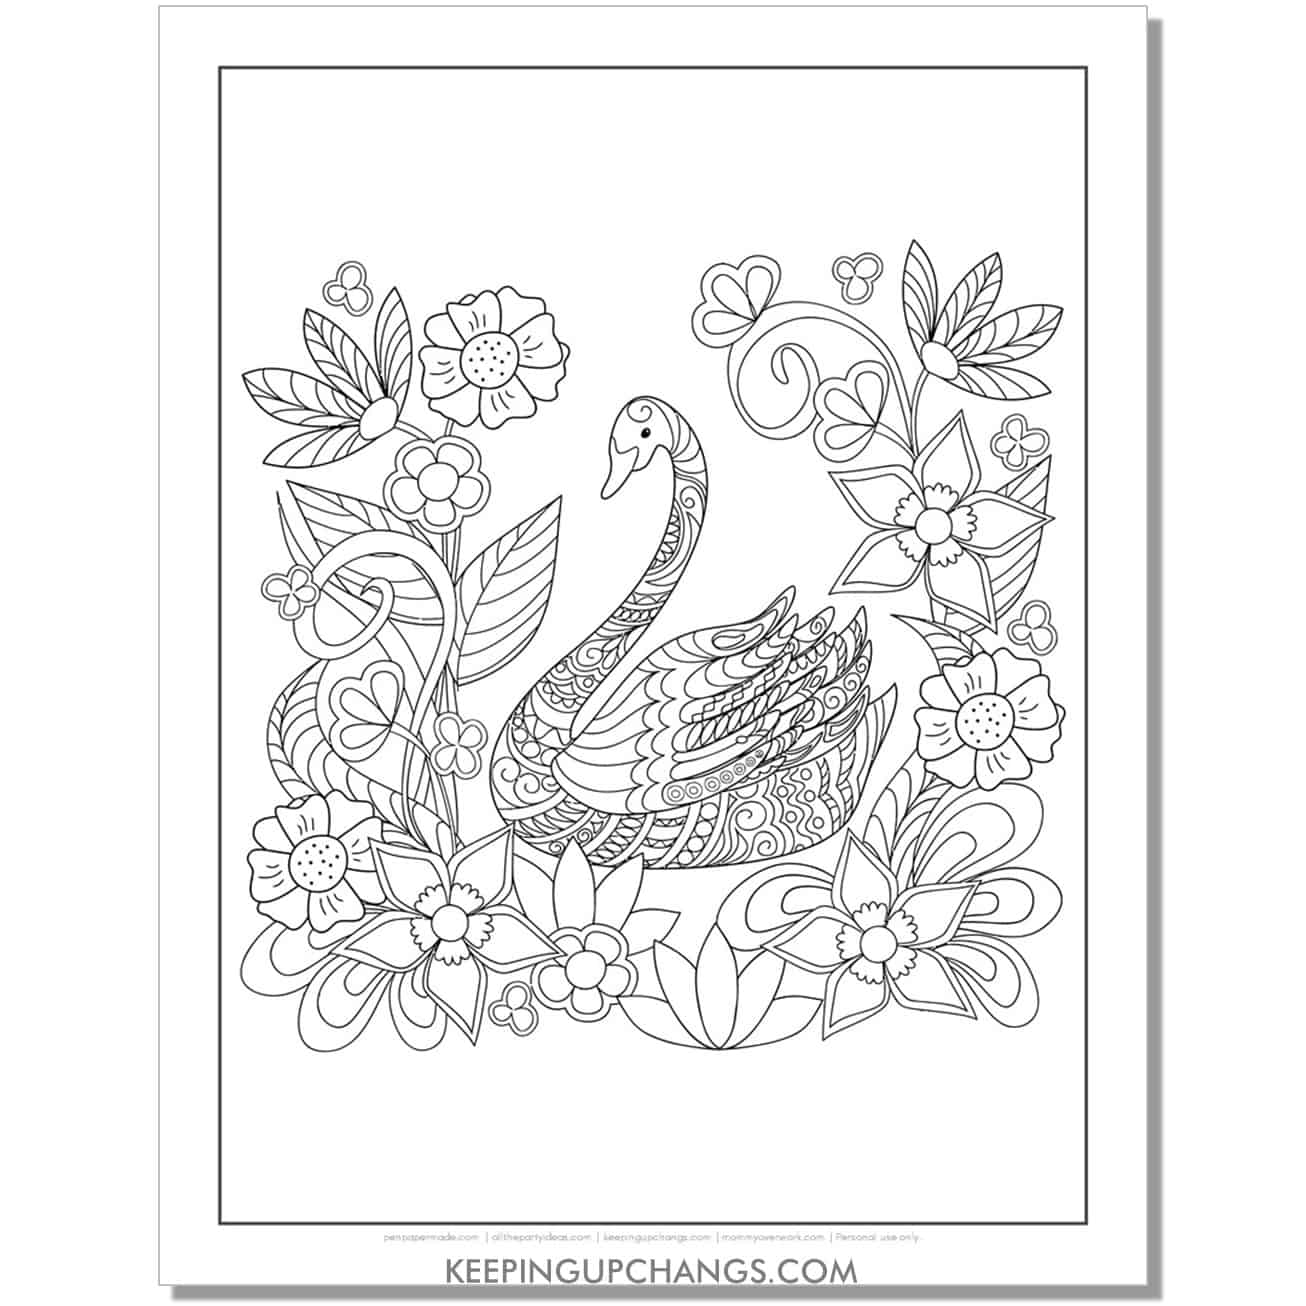 calm, floral swan coloring page for stress relief.